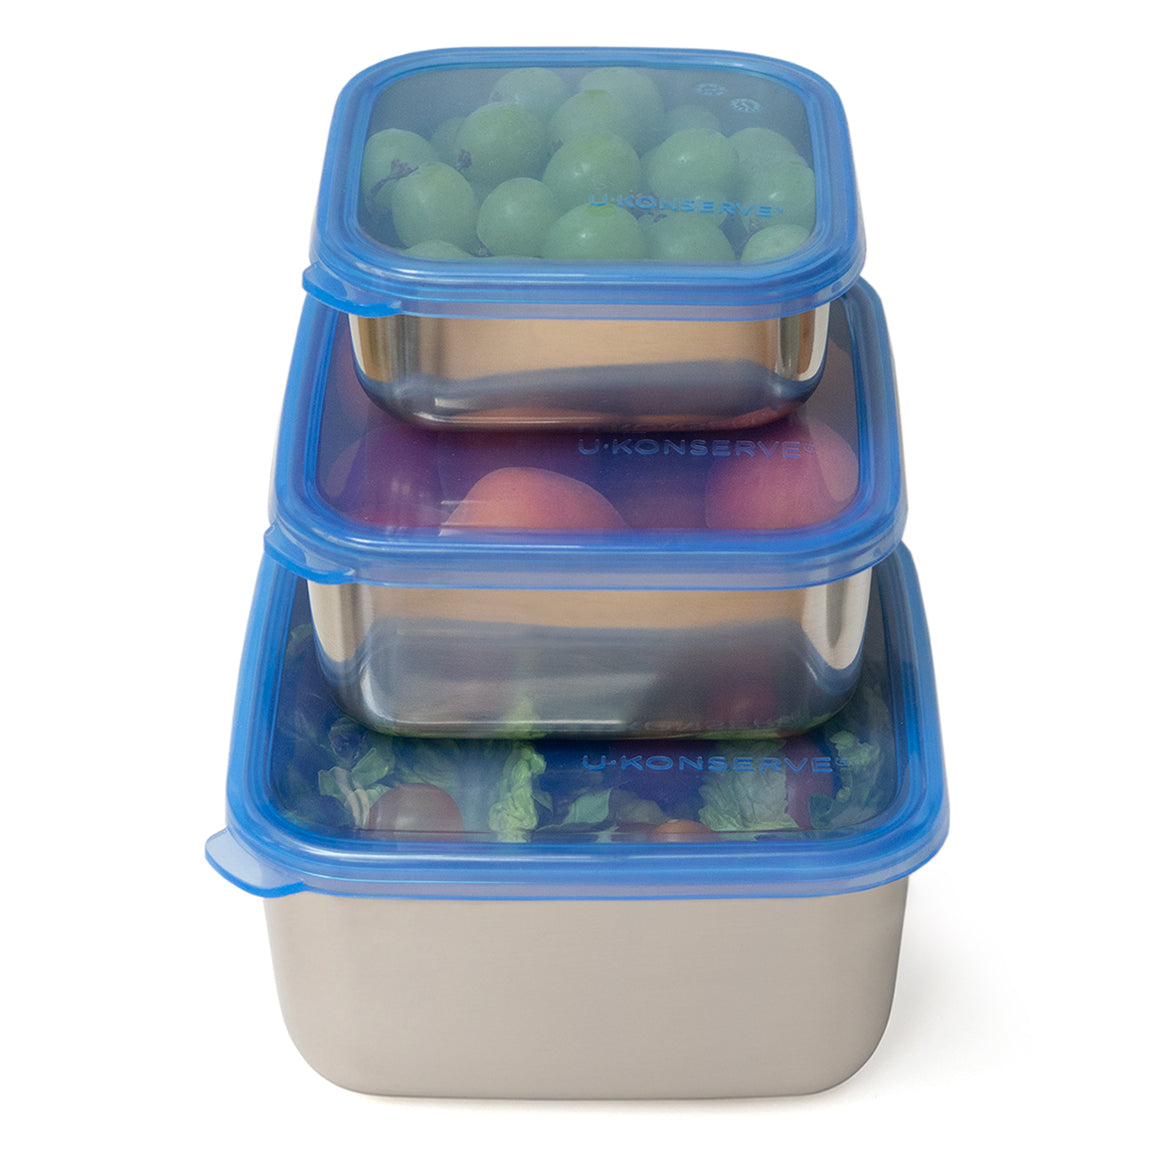 Rubbermaid Easy Find Lids Food Storage Containers with Lids - BPA Free  Durable Plastic Food Containers Great for Home, School, Travel - Freezer,  Microwave, and Dishwasher Safe - 28 Piece Set - Red 